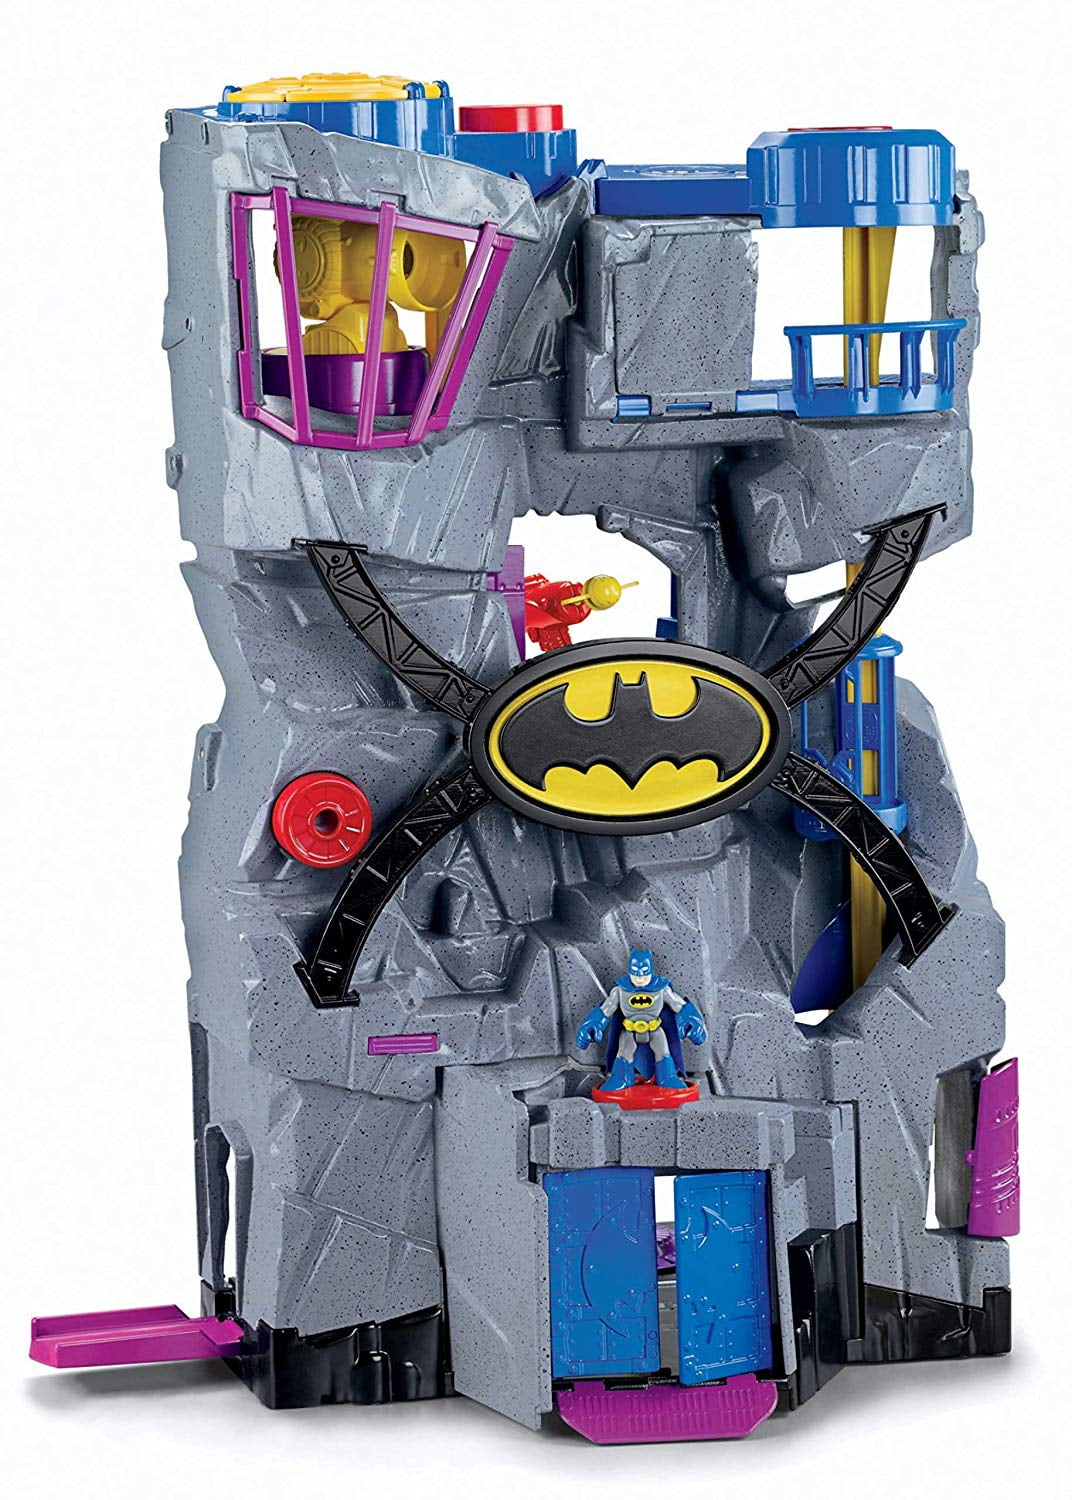 Fisher PrIce Imaginext Super Friends Batcave Cave part gray door Replacement Toy 